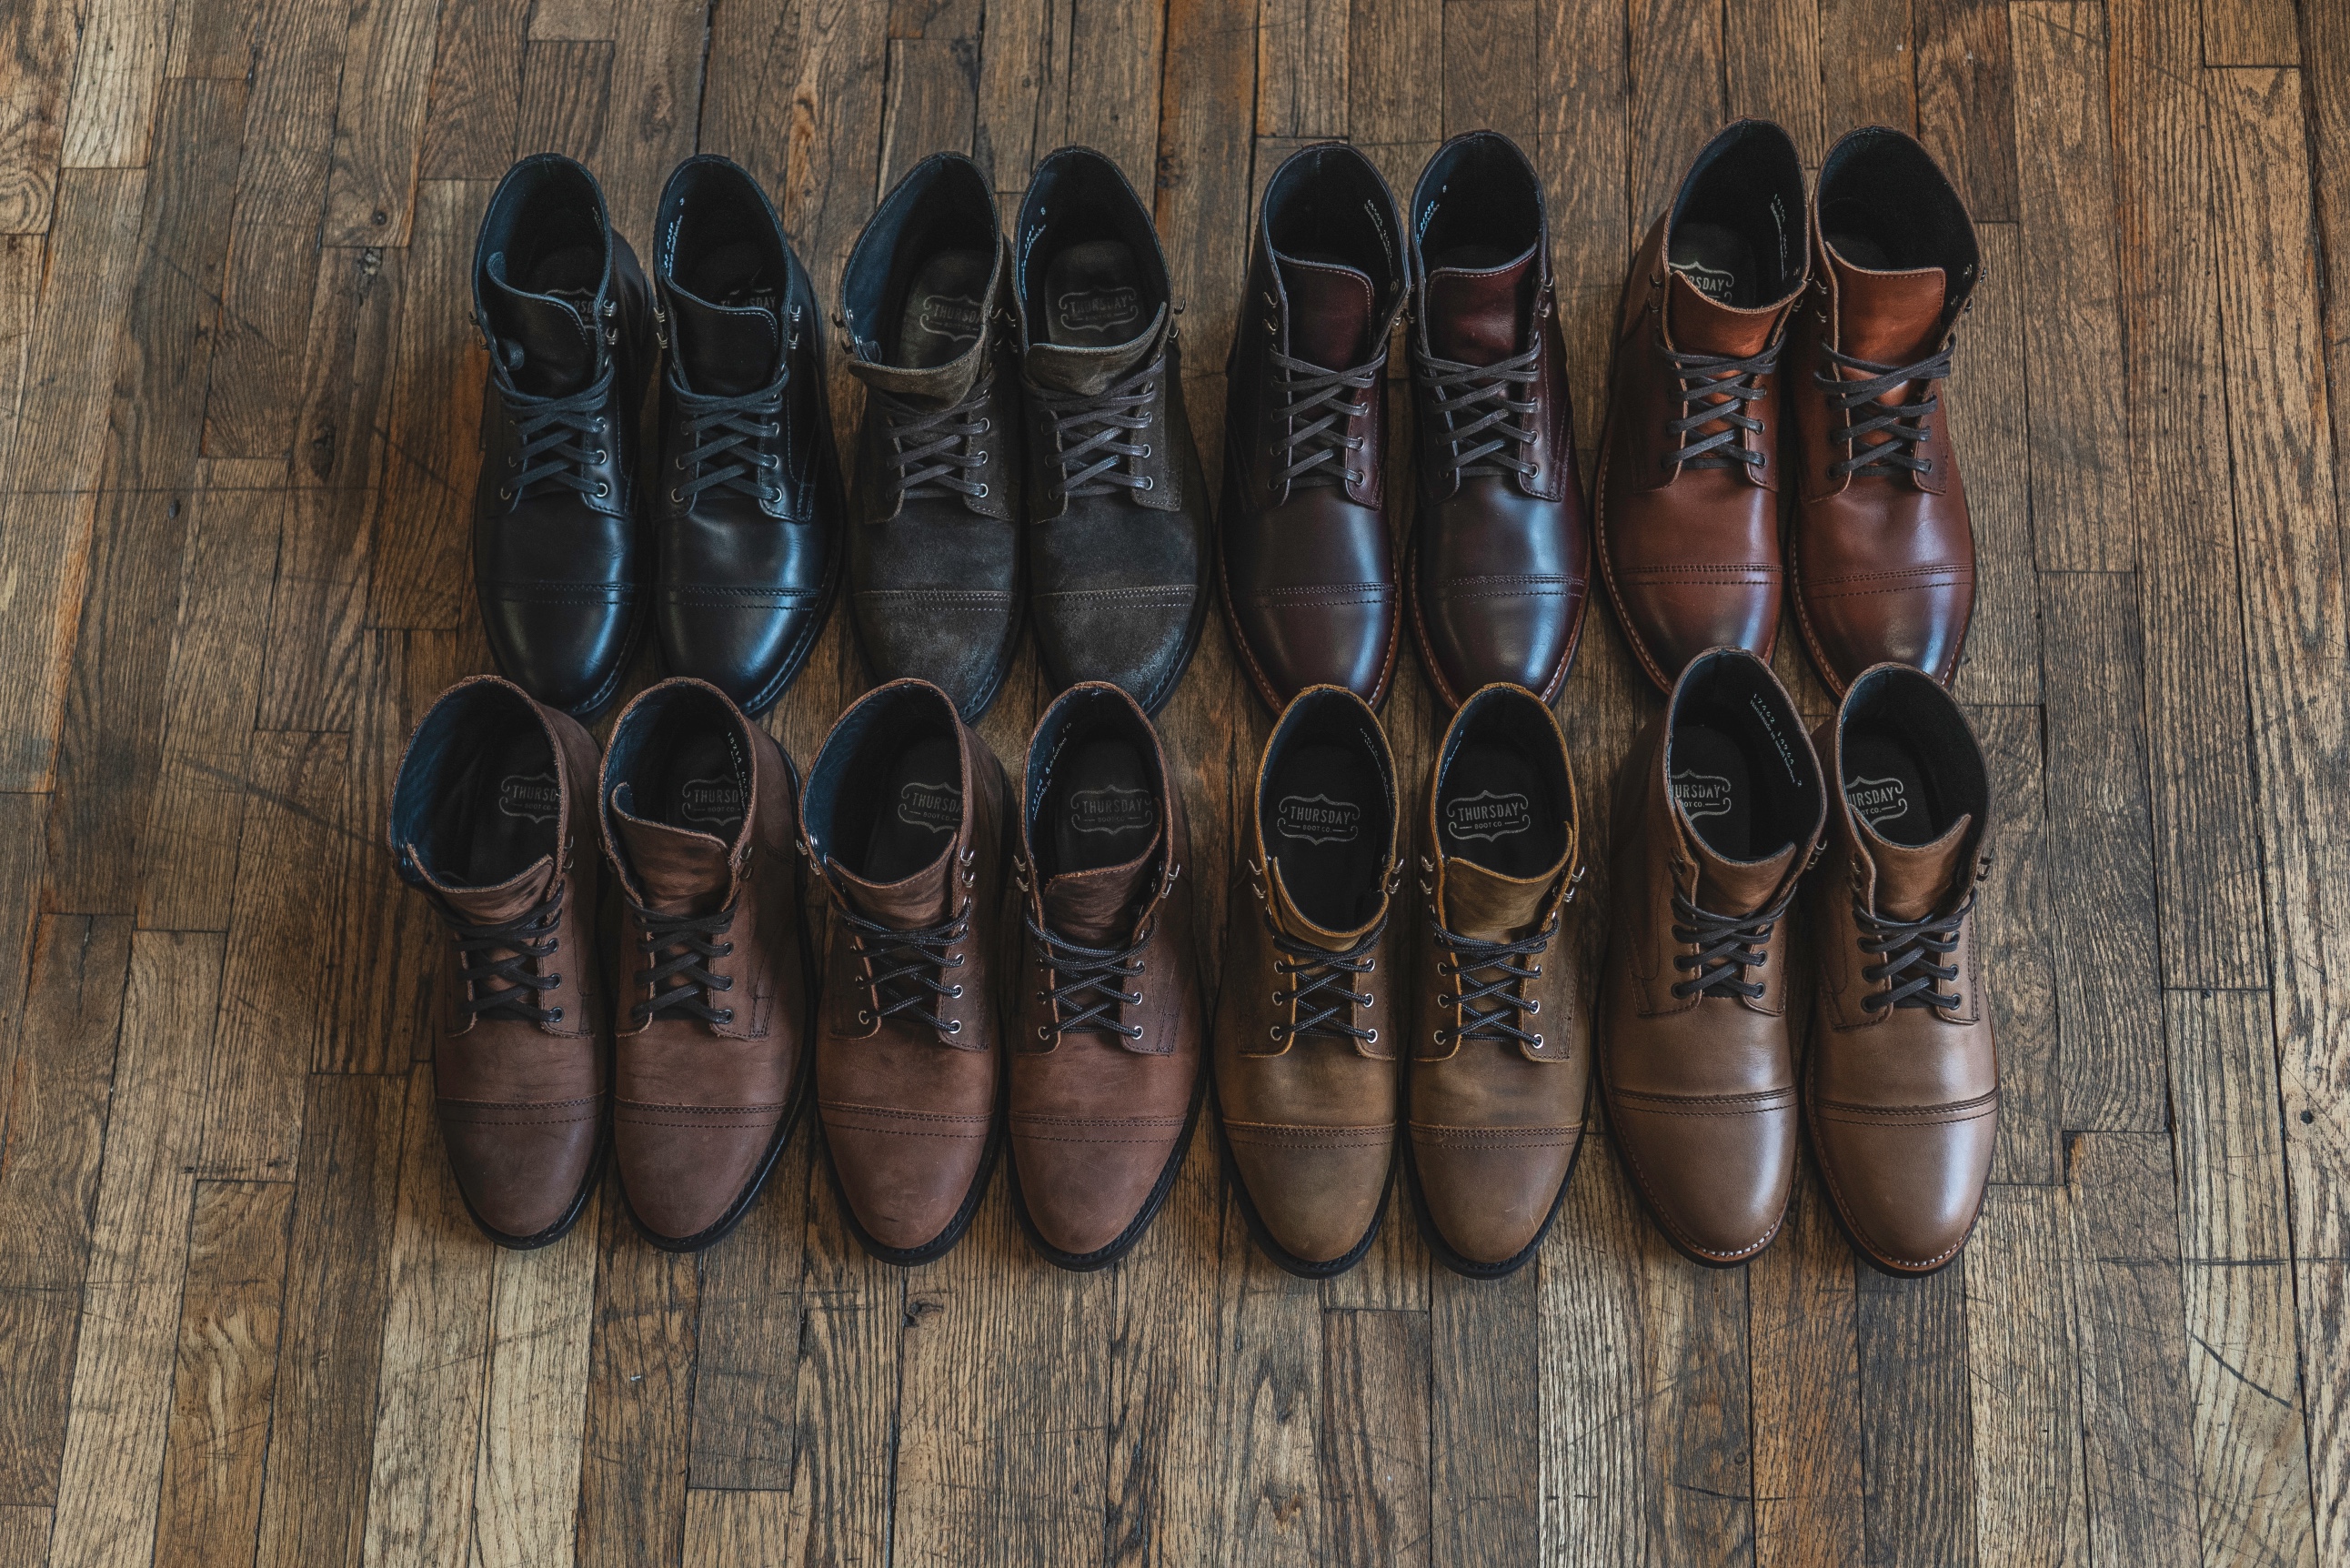 rugged boot and shoe company